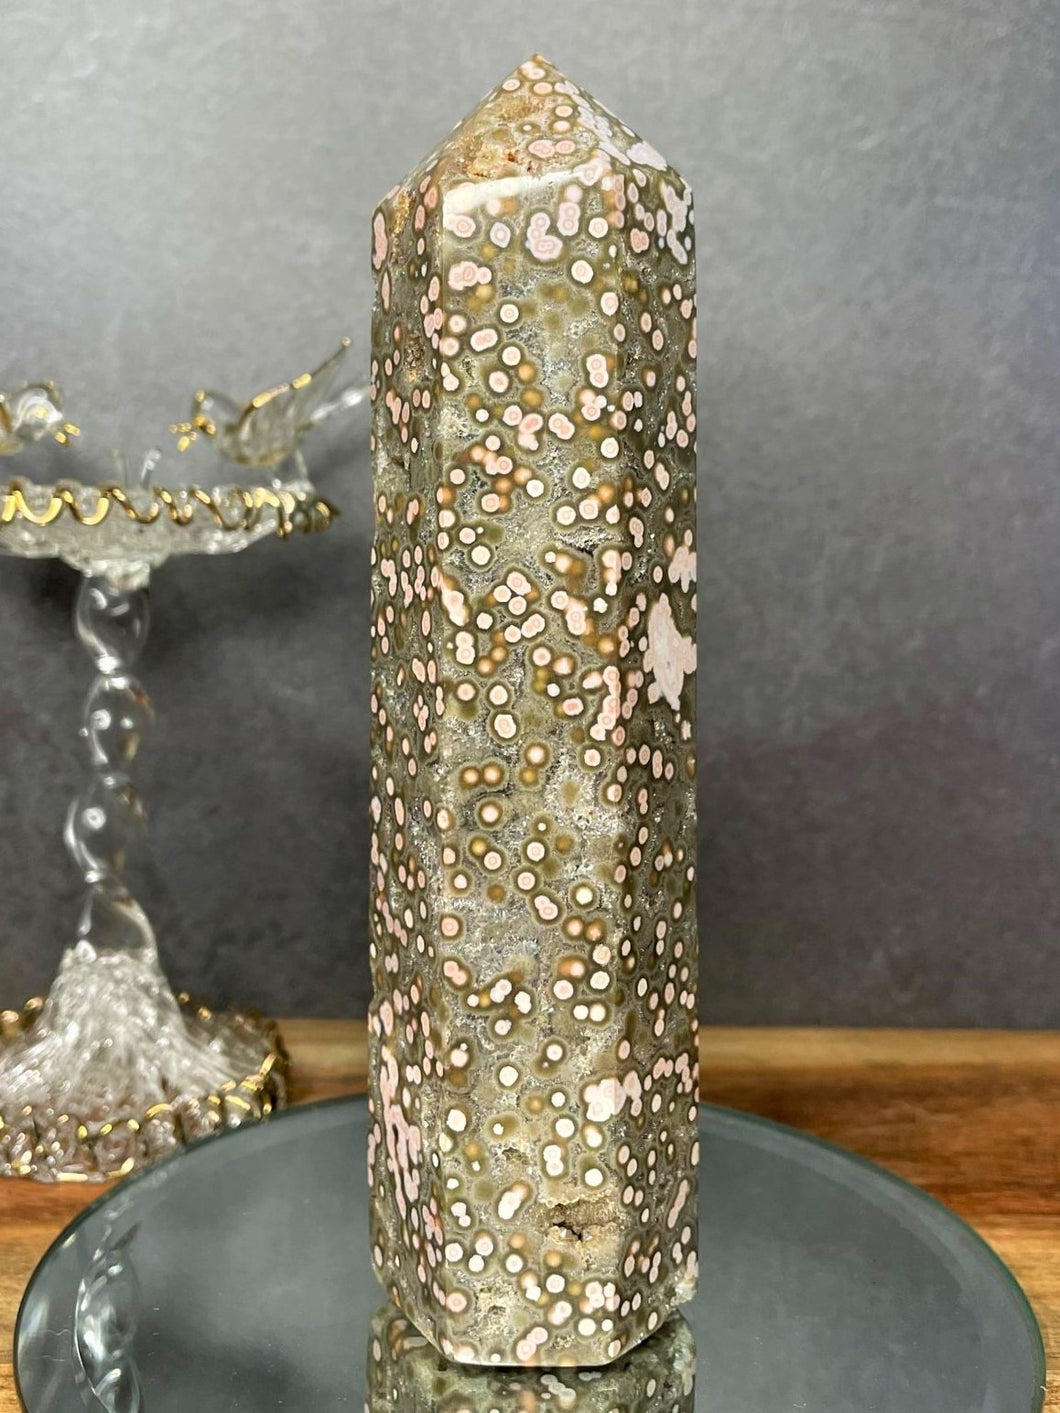 Spectacular High Quality Ocean Jasper Orbicular Tower With Pink Circle Eyes